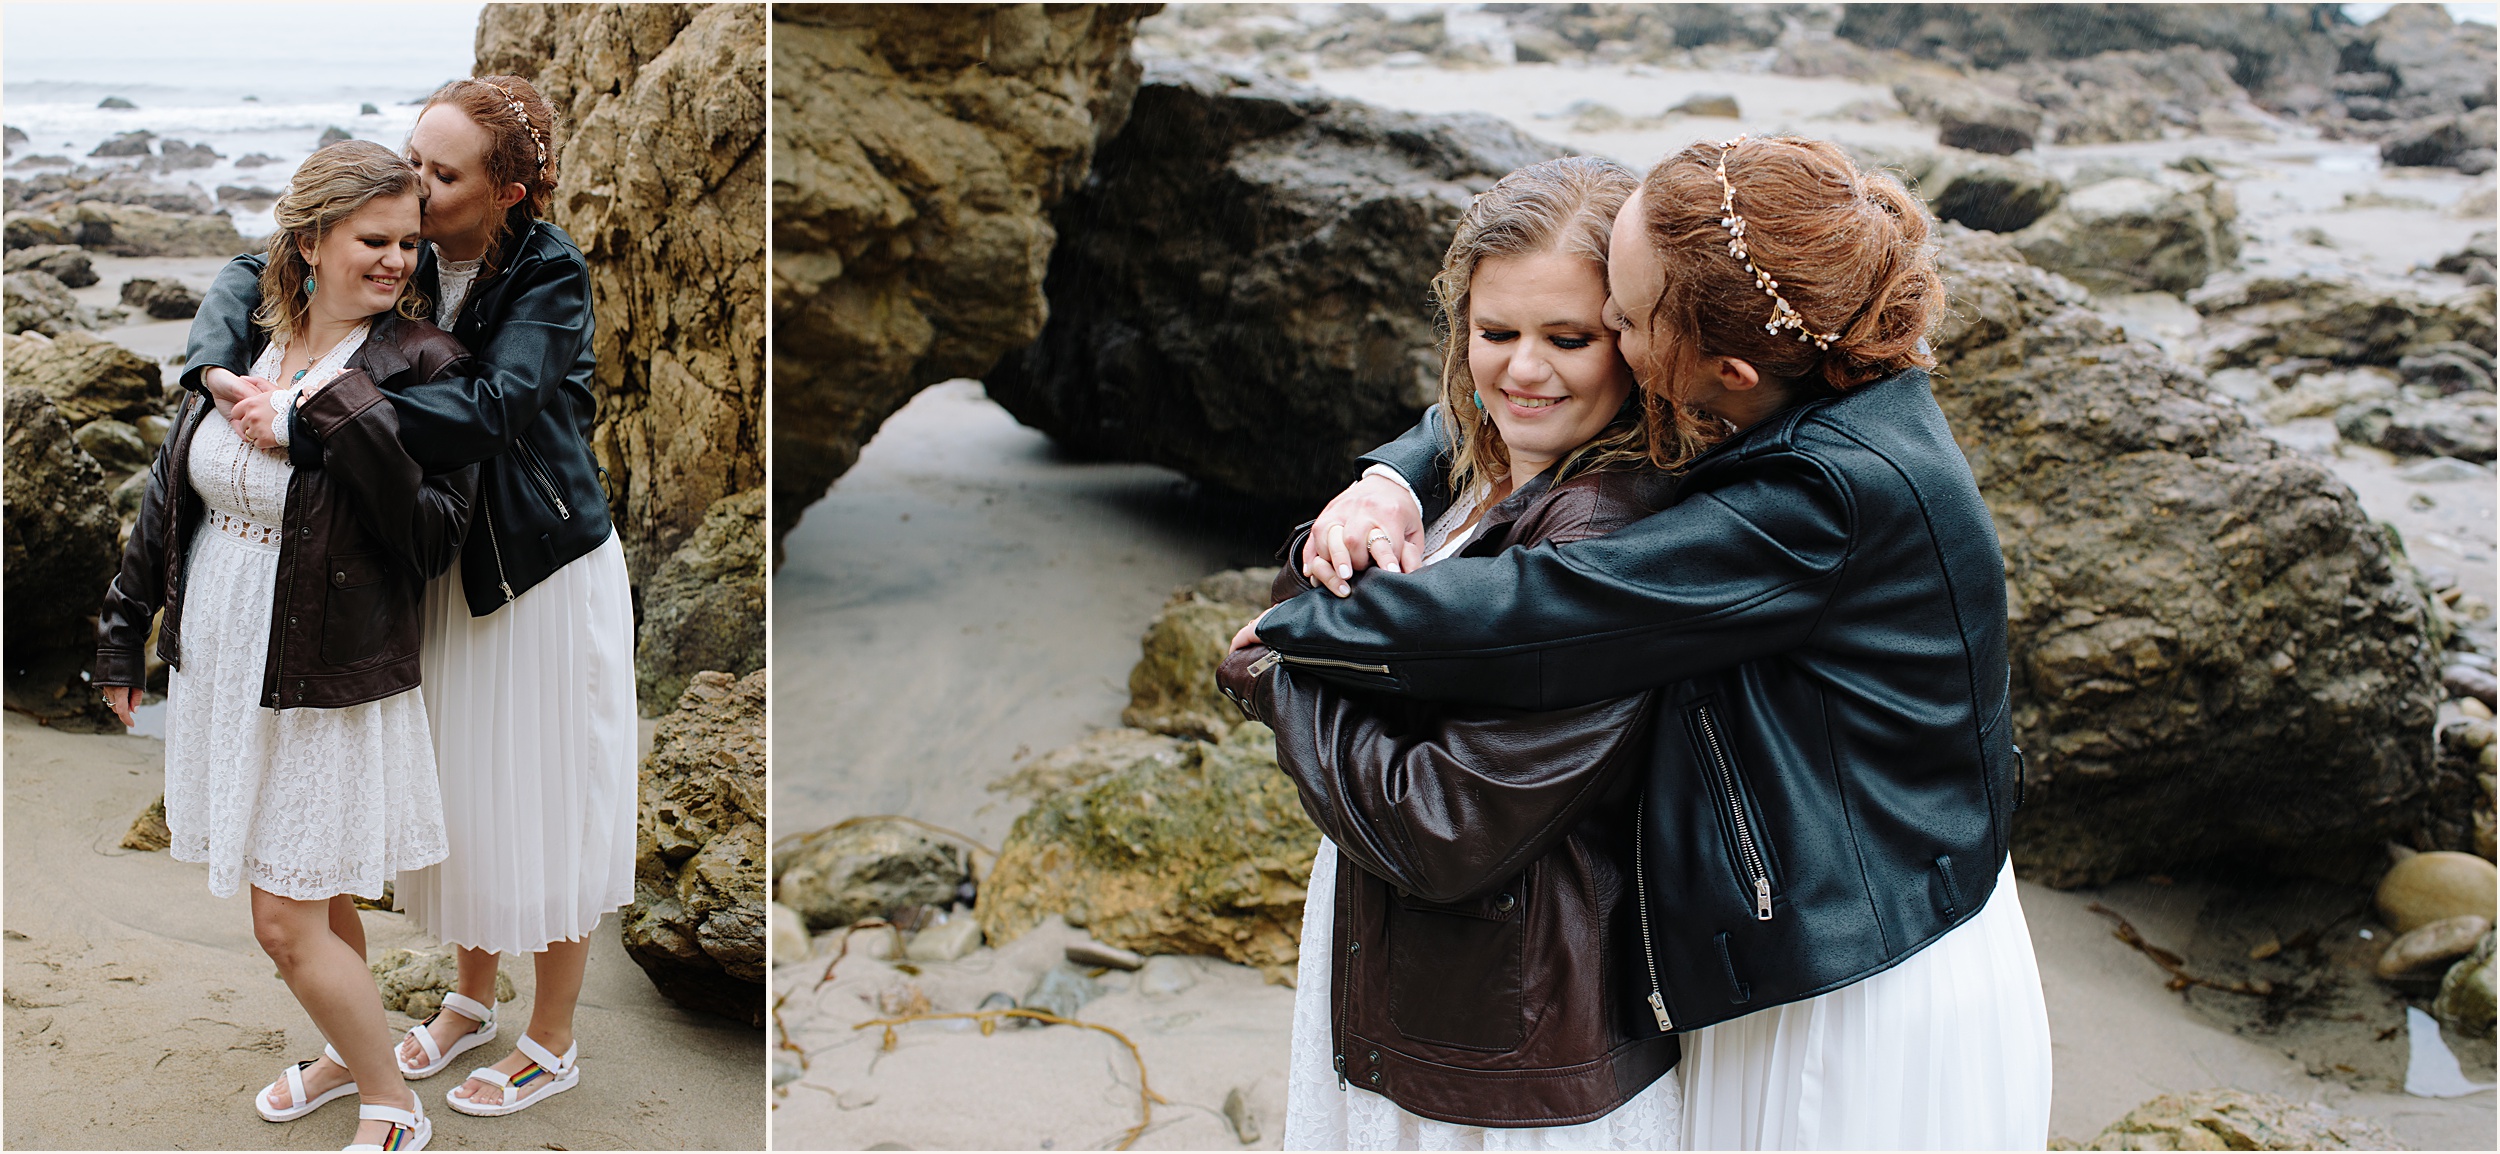 Photo of brides in stunning white lace elopement dresses and leather jackets at El Matador beach